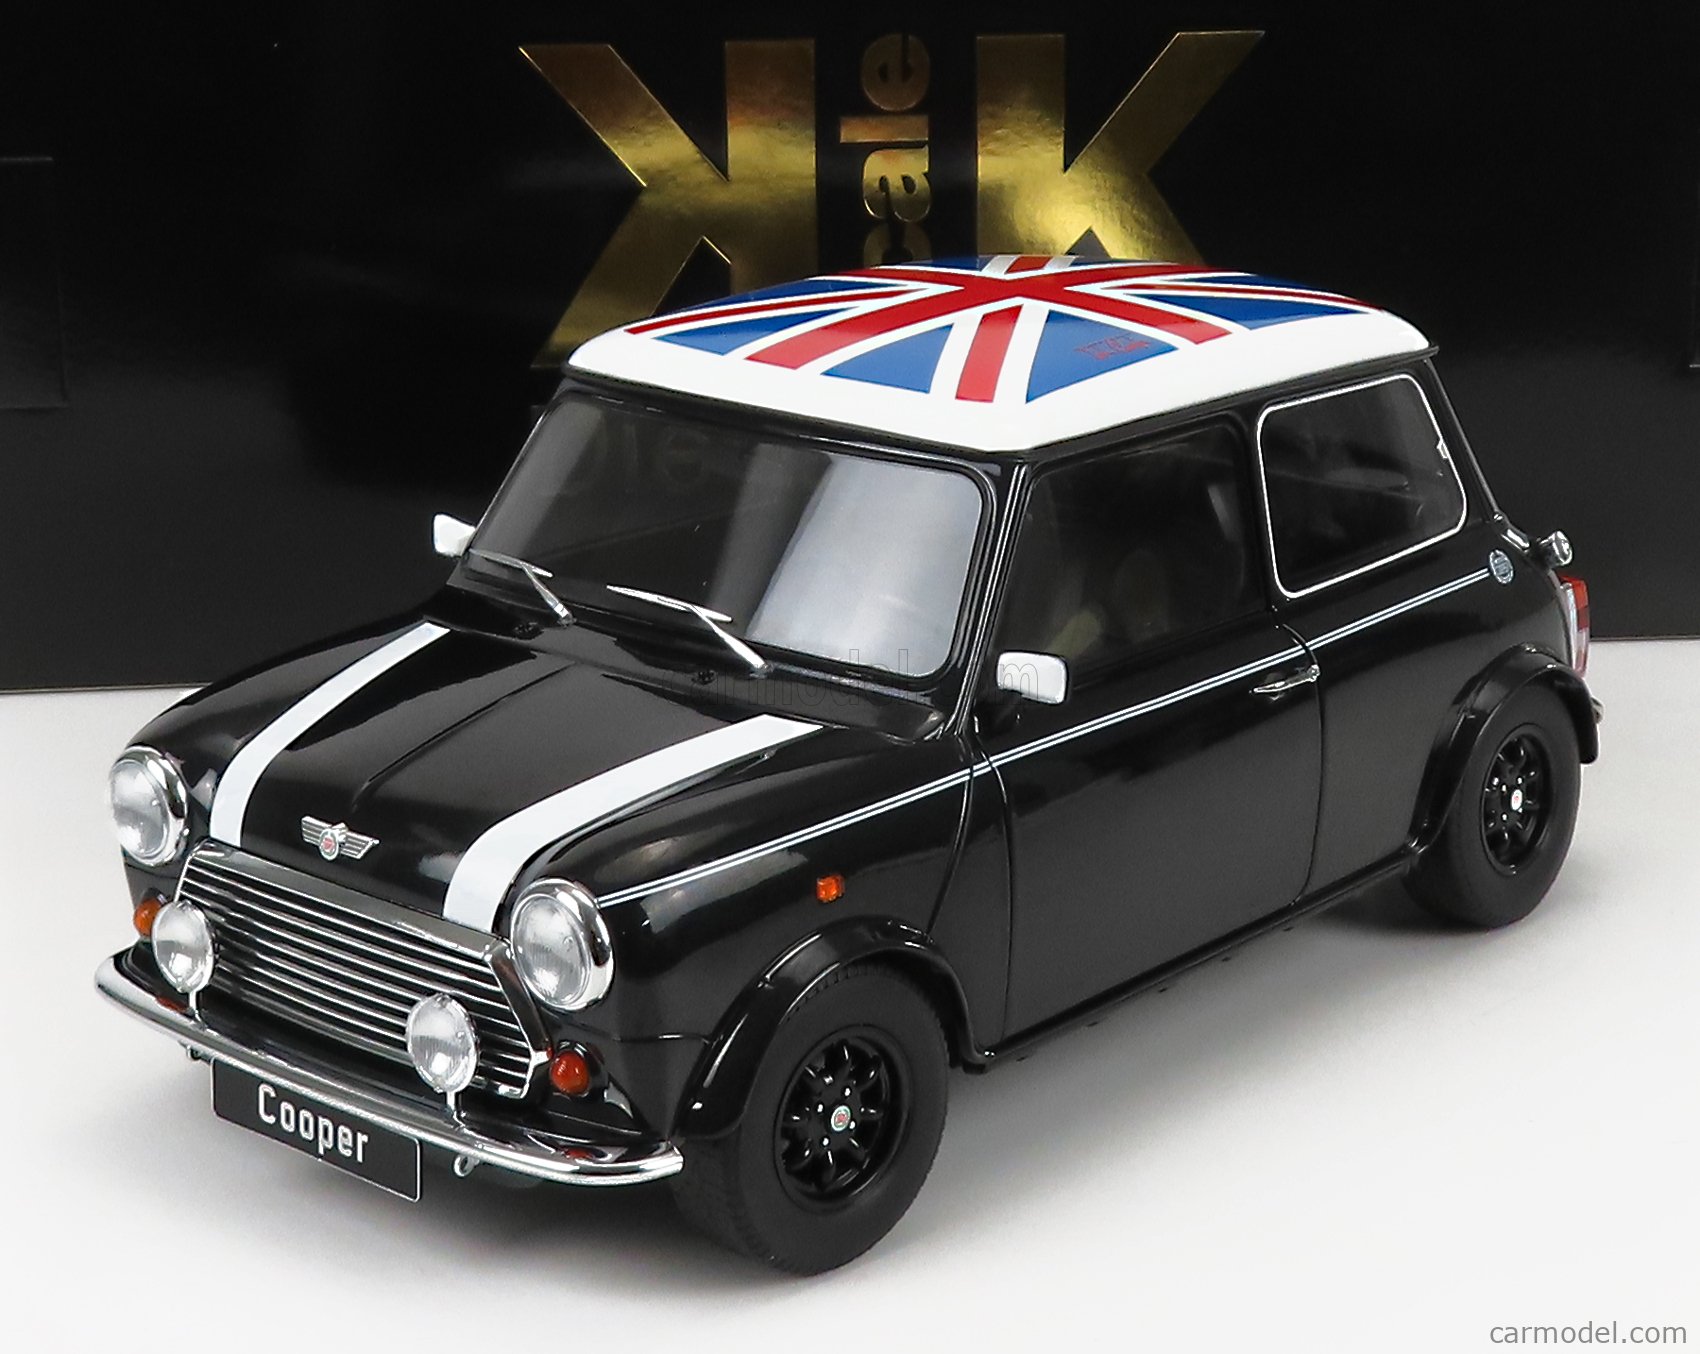 MINI - COOPER LHD 1992 WITH UNION JACK